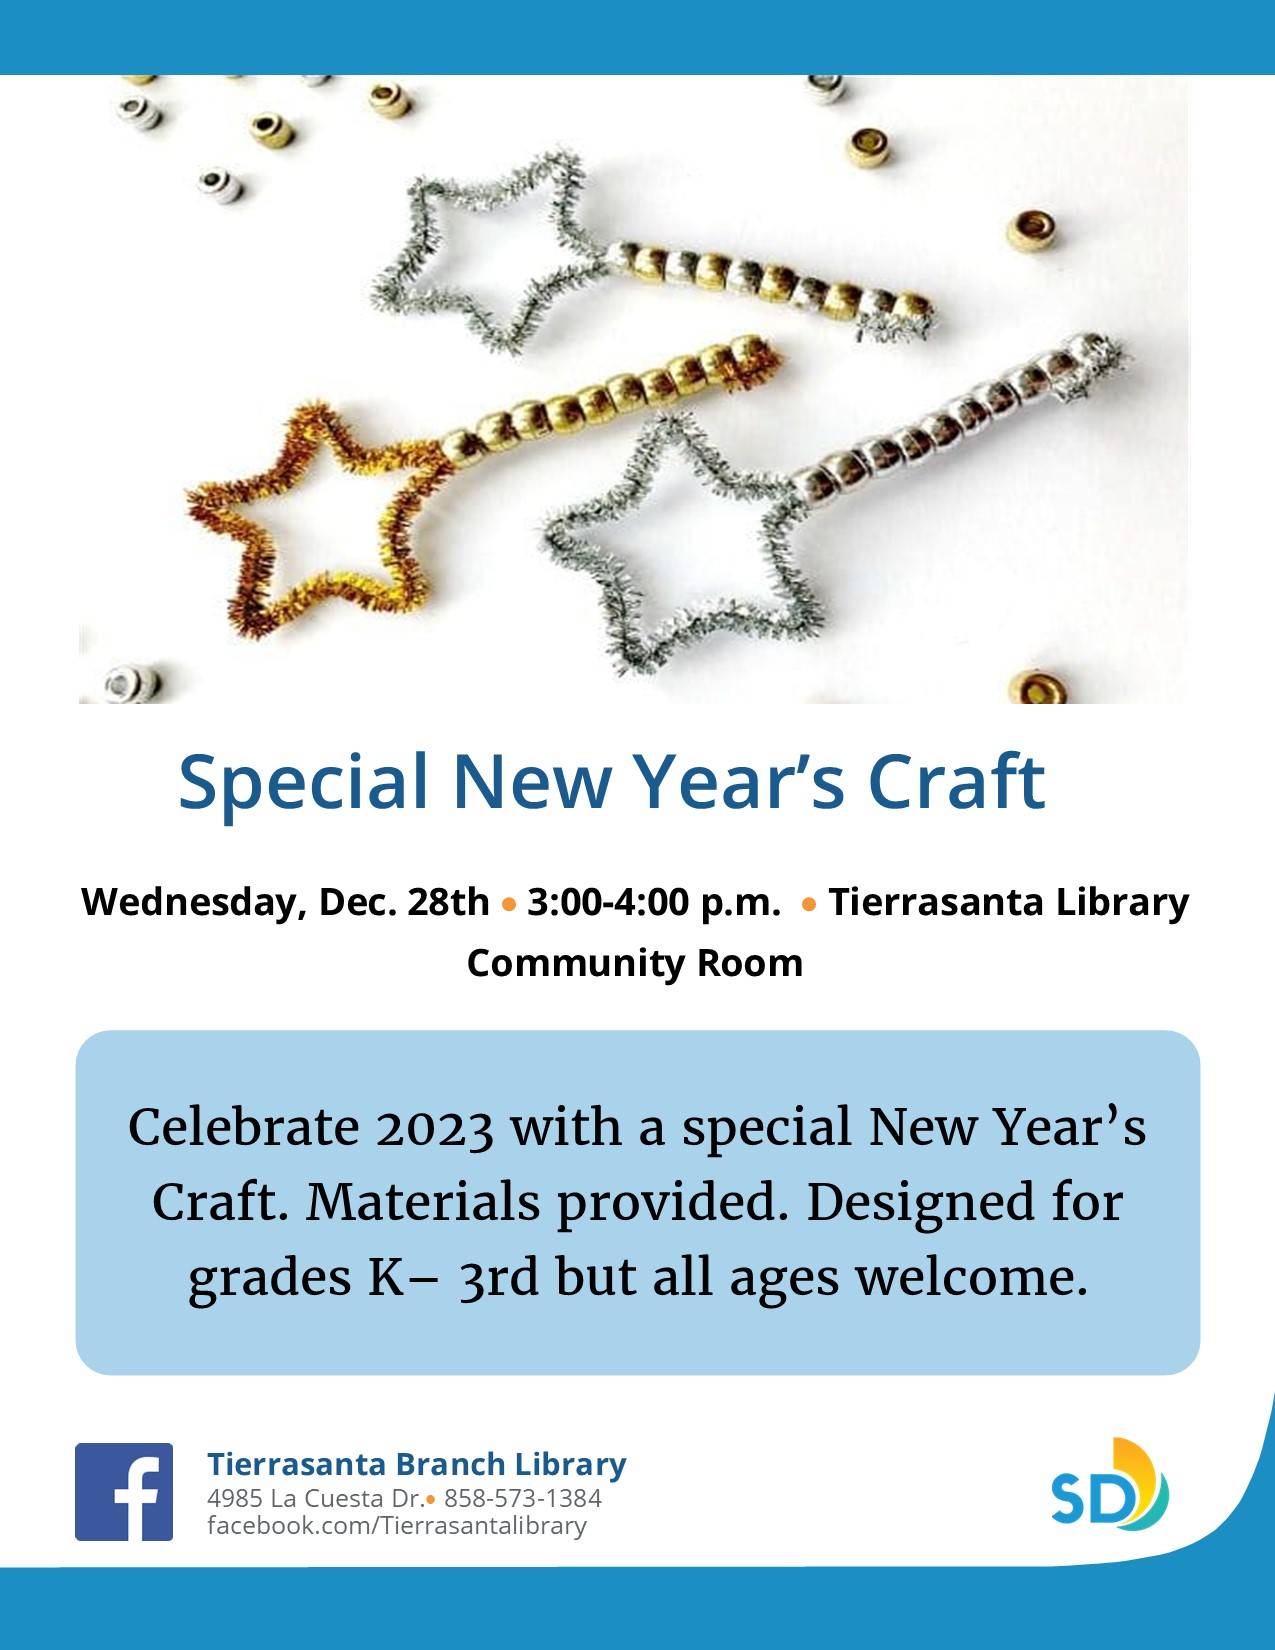 Flyer with an image of sparkly pipe-cleaner star wands  